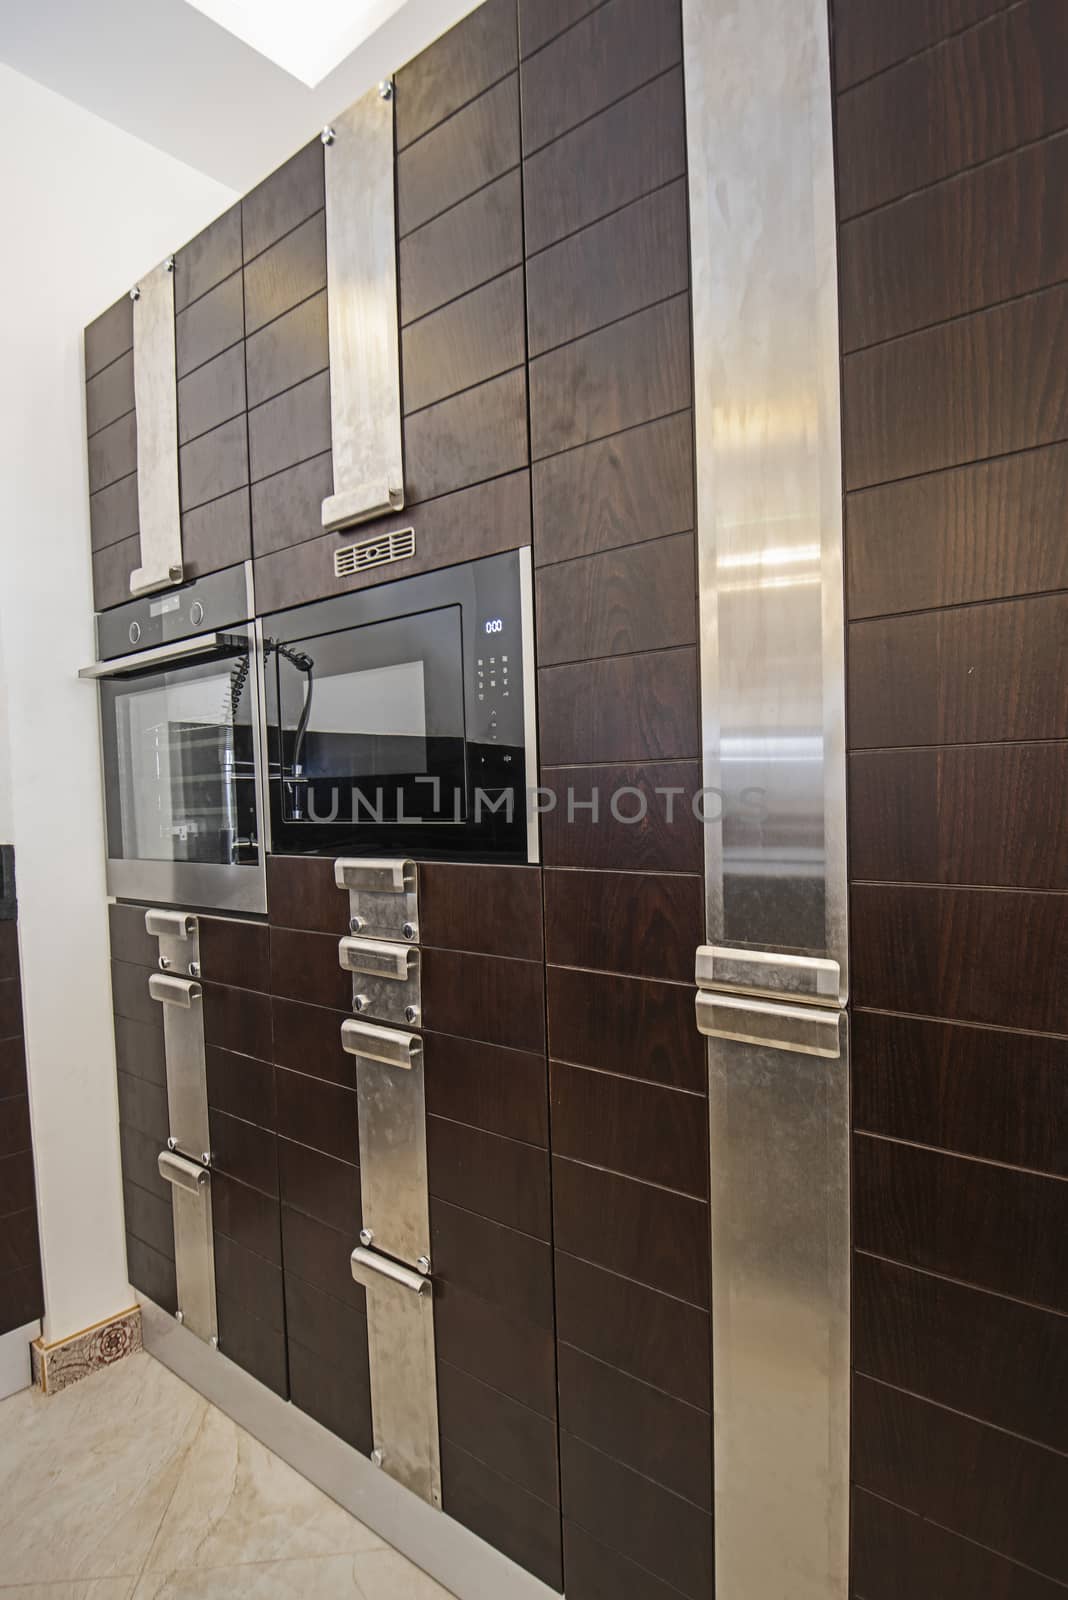 Interior design decor showing modern kitchen with cupboards and built in cooker in luxury apartment showroom